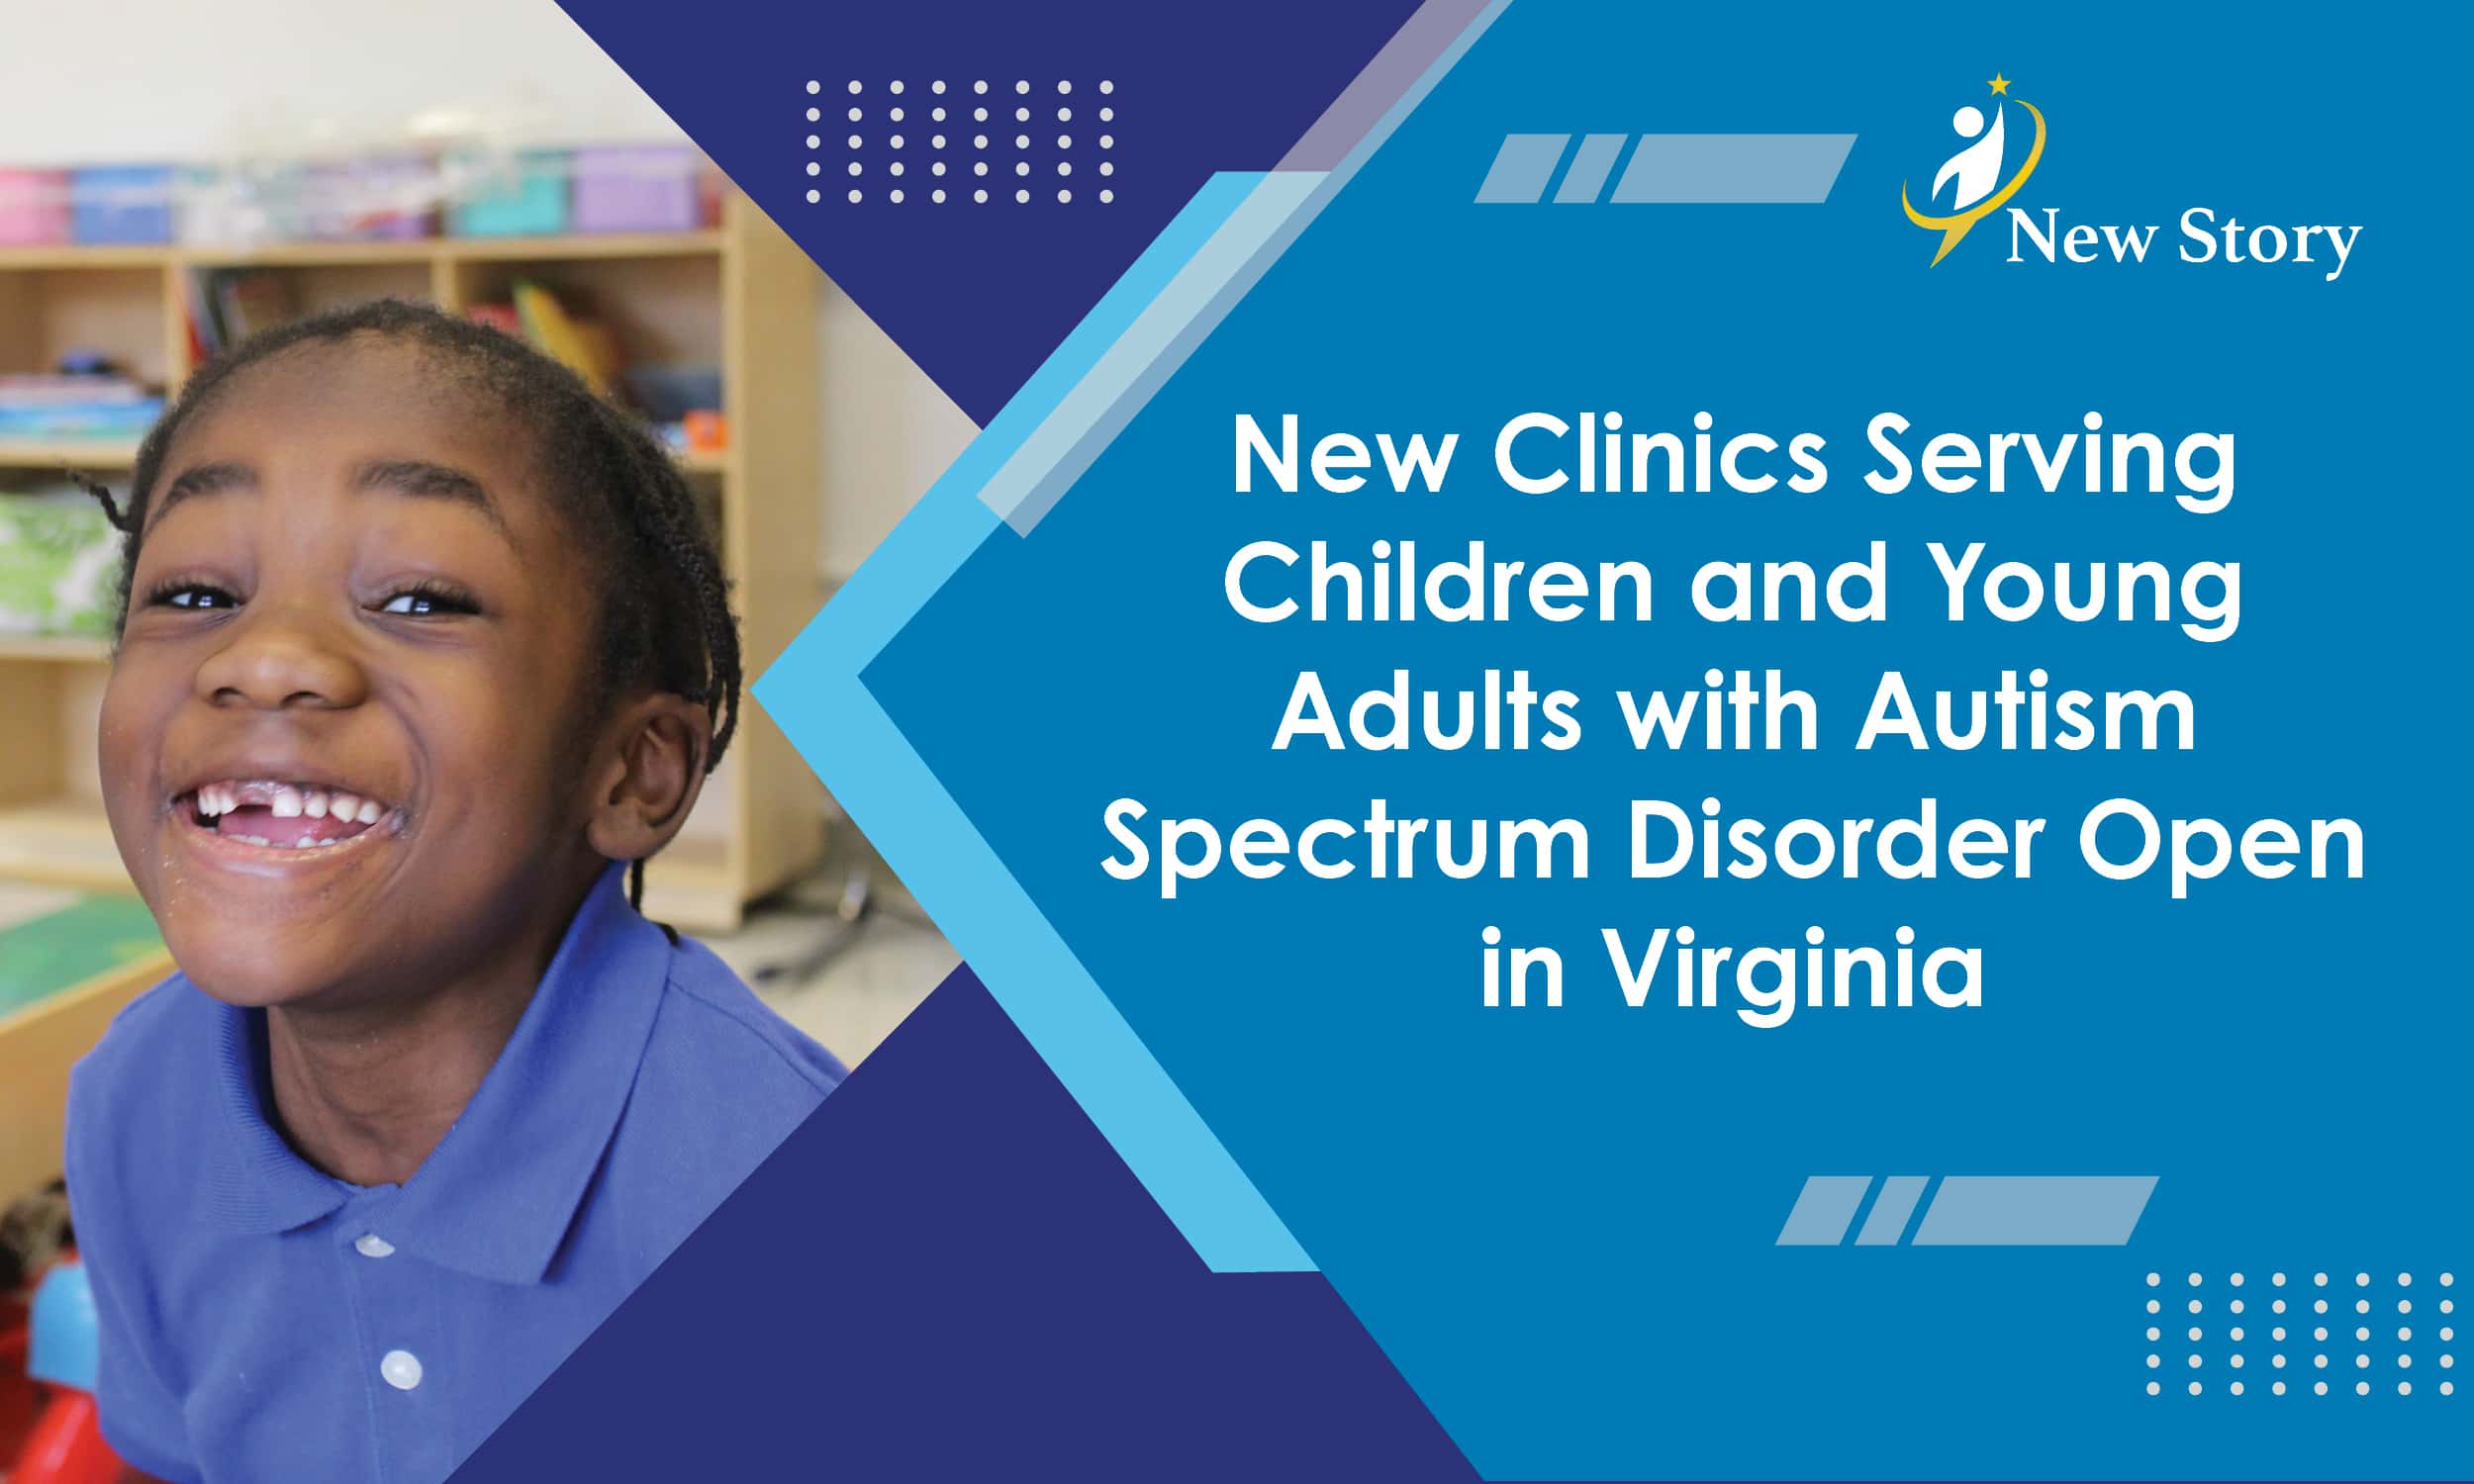 New Clinics Serving Children and Young Adults with Autism Spectrum Disorder Open in Virginia